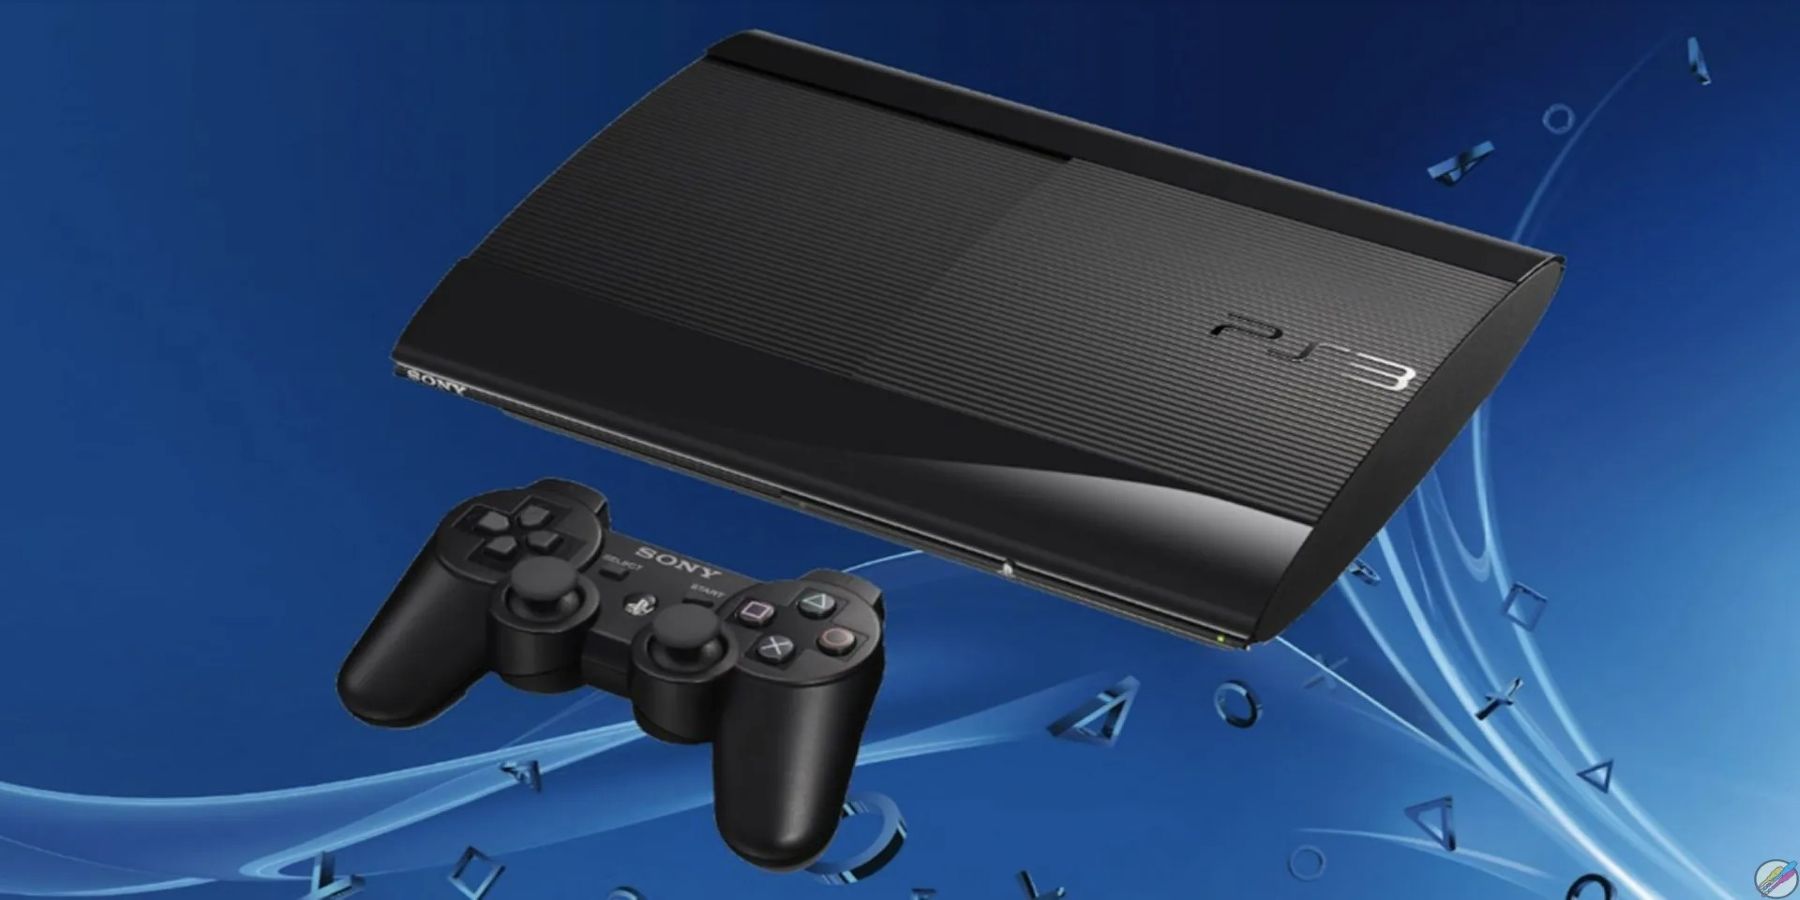 PS3 Firmware 4.90 is out! (and you really don't want to update